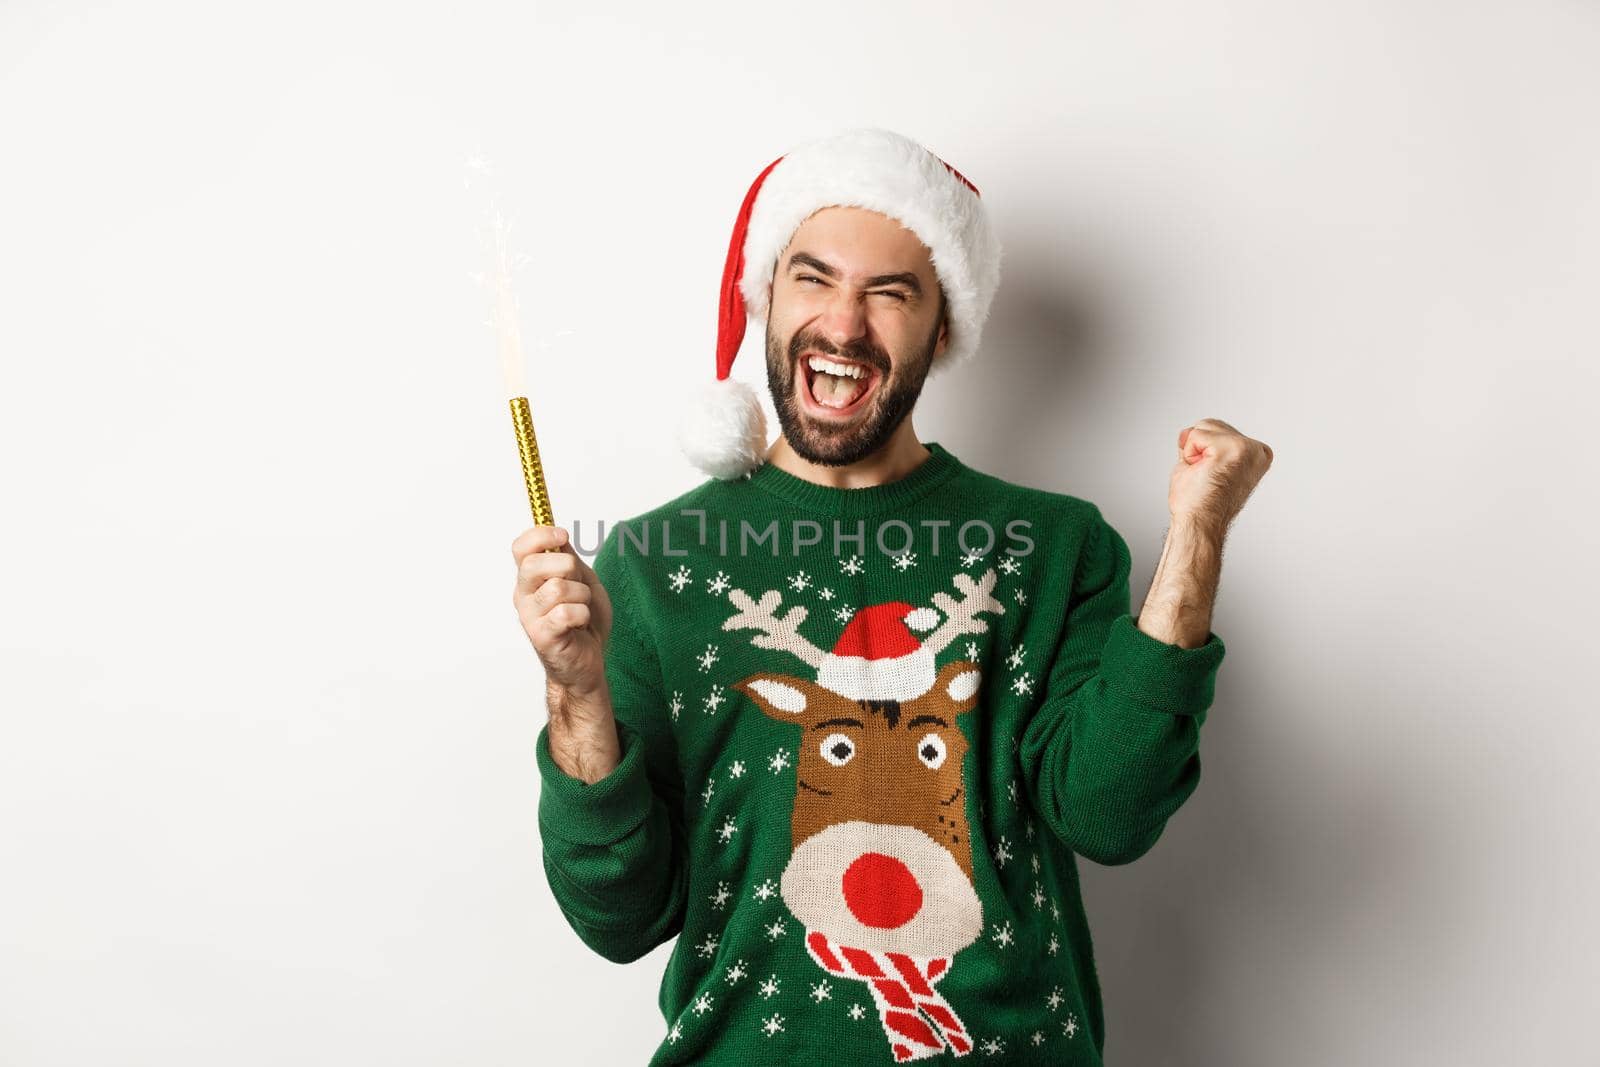 Christmas party and holidays concept. Happy young man celebrating New Year xmas, holding sparkler and looking excited, standing over white background.